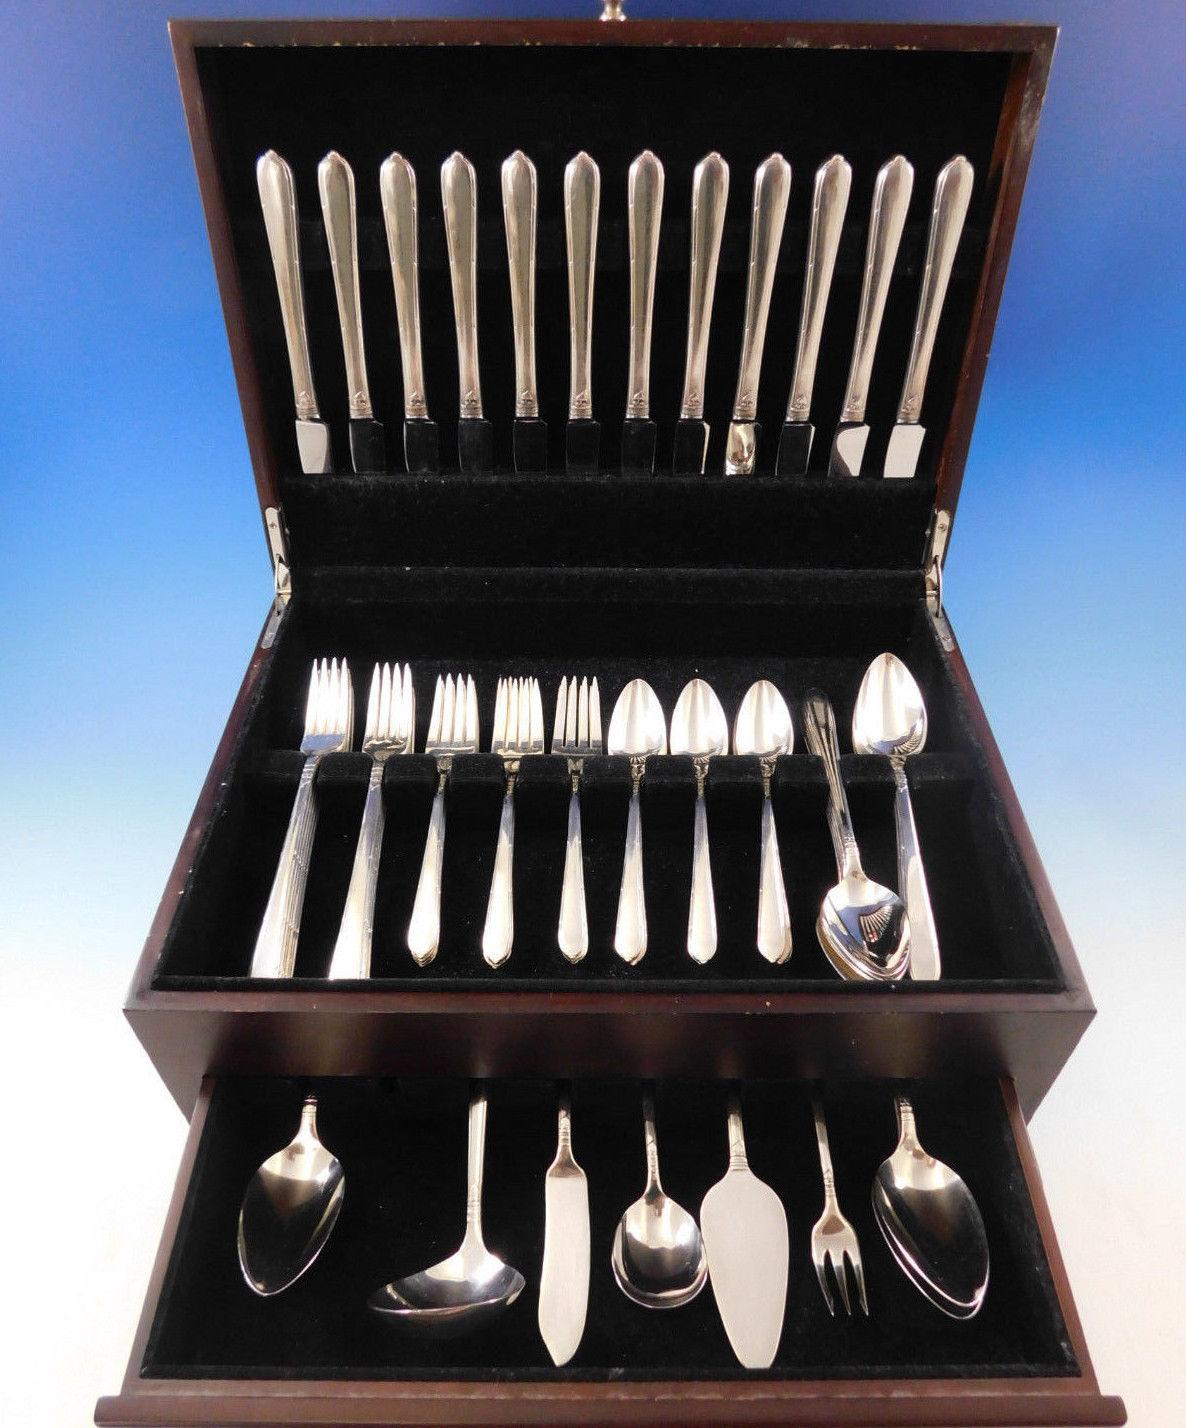 Grille size Berkley square by community Oneida circa 1935 silver plate flatware set, 68 pieces. Grille size knives and forks have elongated handles and short blades/tines. This set includes:

12 grille size knives, 8 3/8